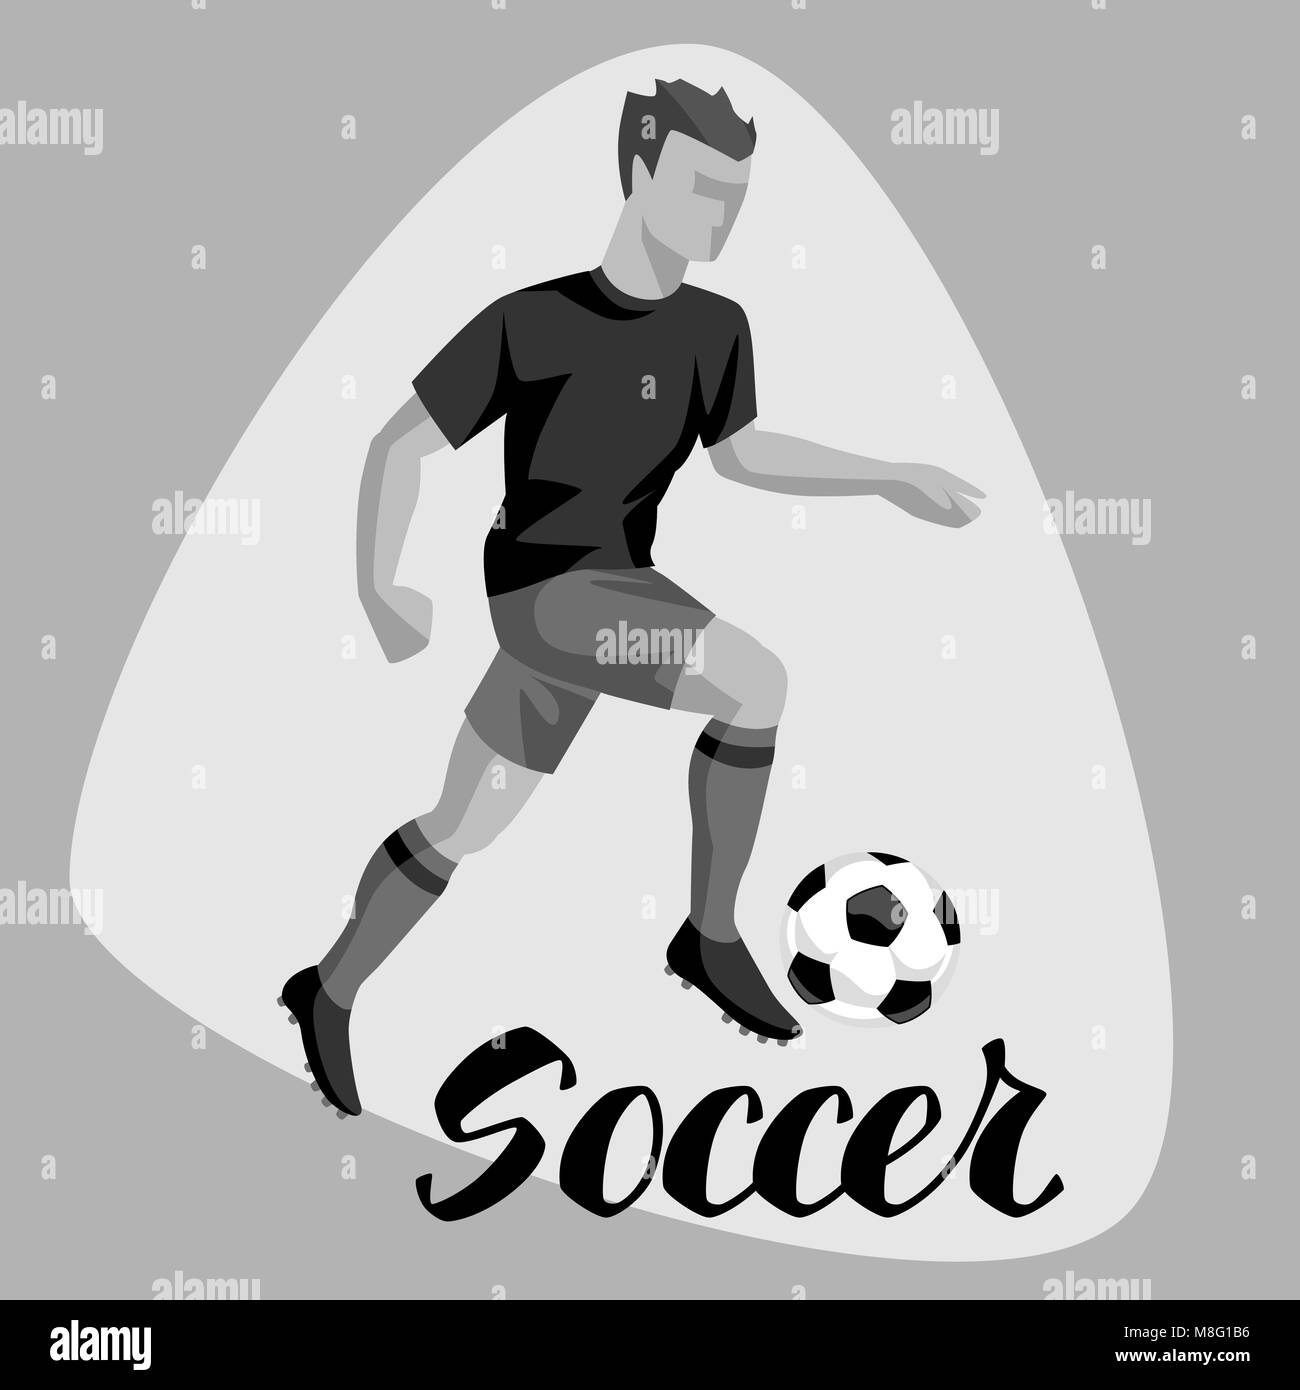 Soccer player with ball. Sports football illustration Stock Vector